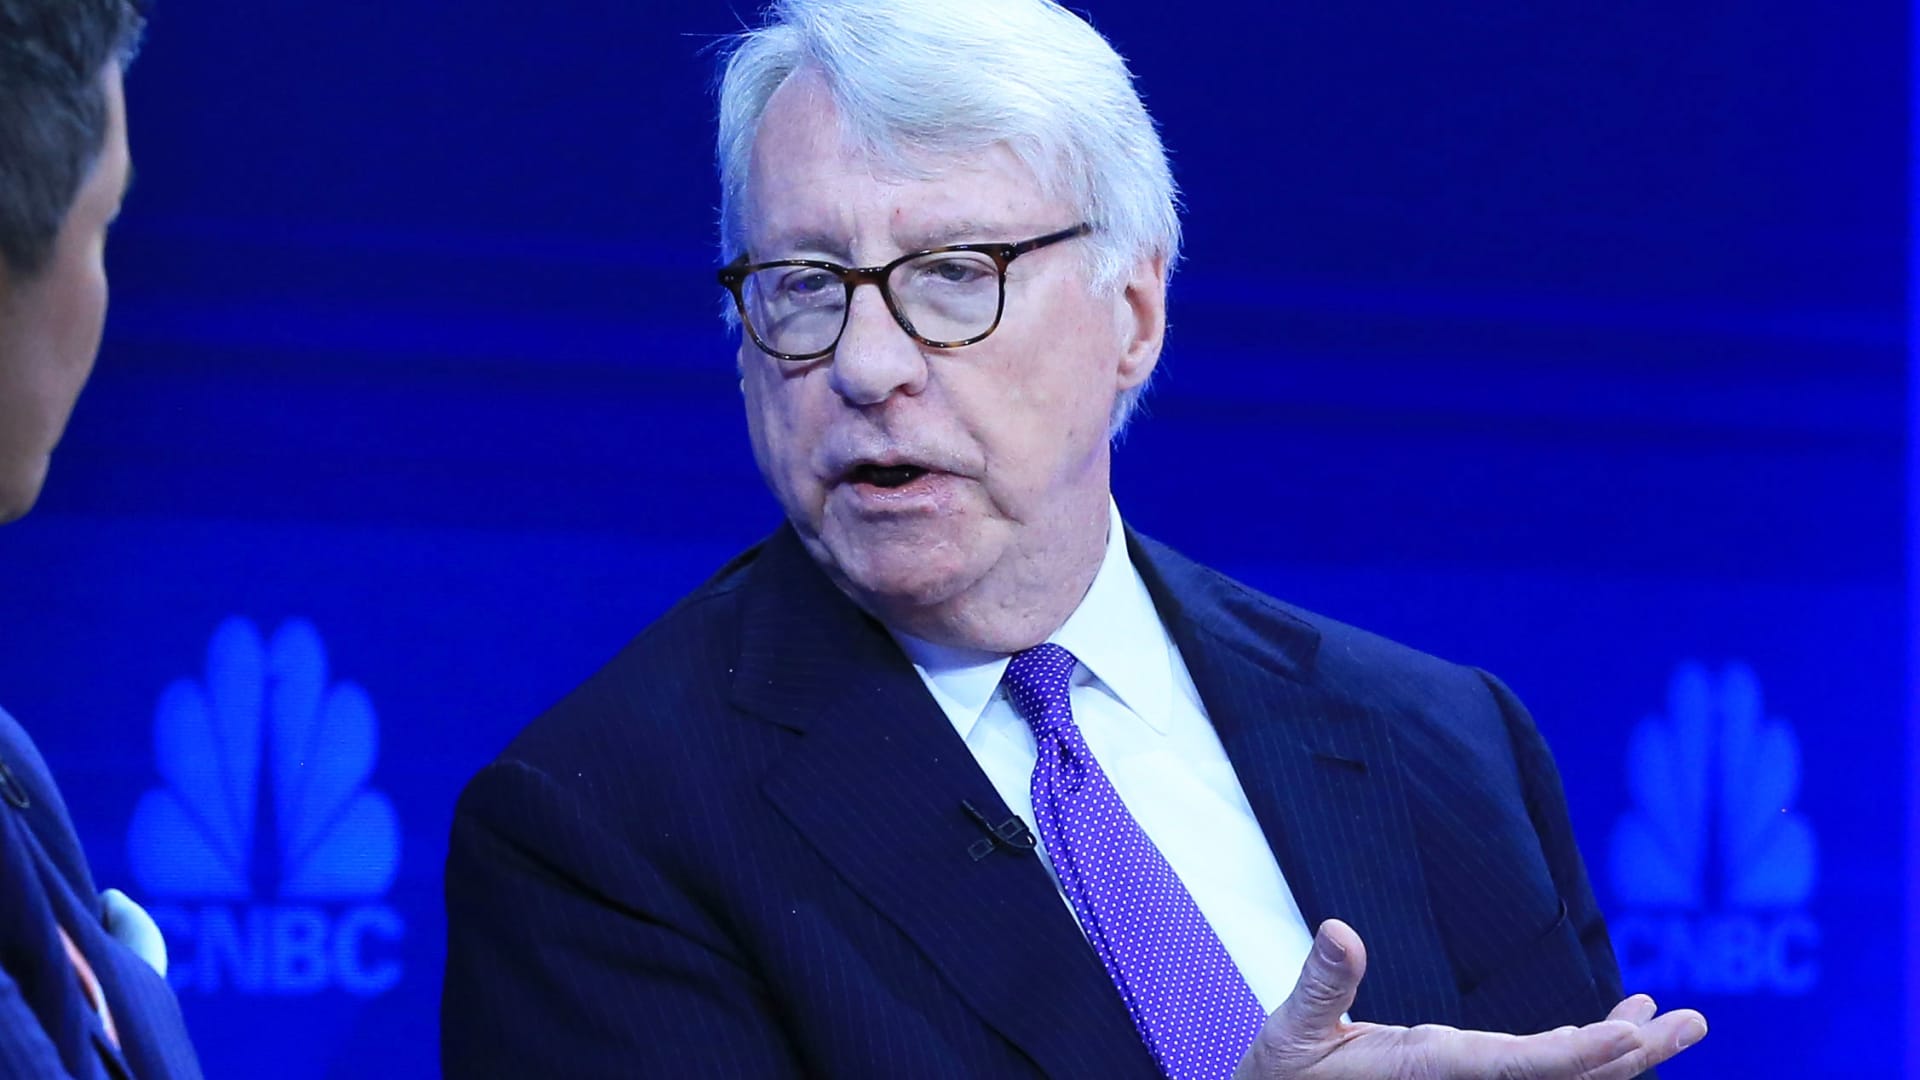 Jim Chanos says he’s still shorting Tesla as EV competition increases, profit margin peaks